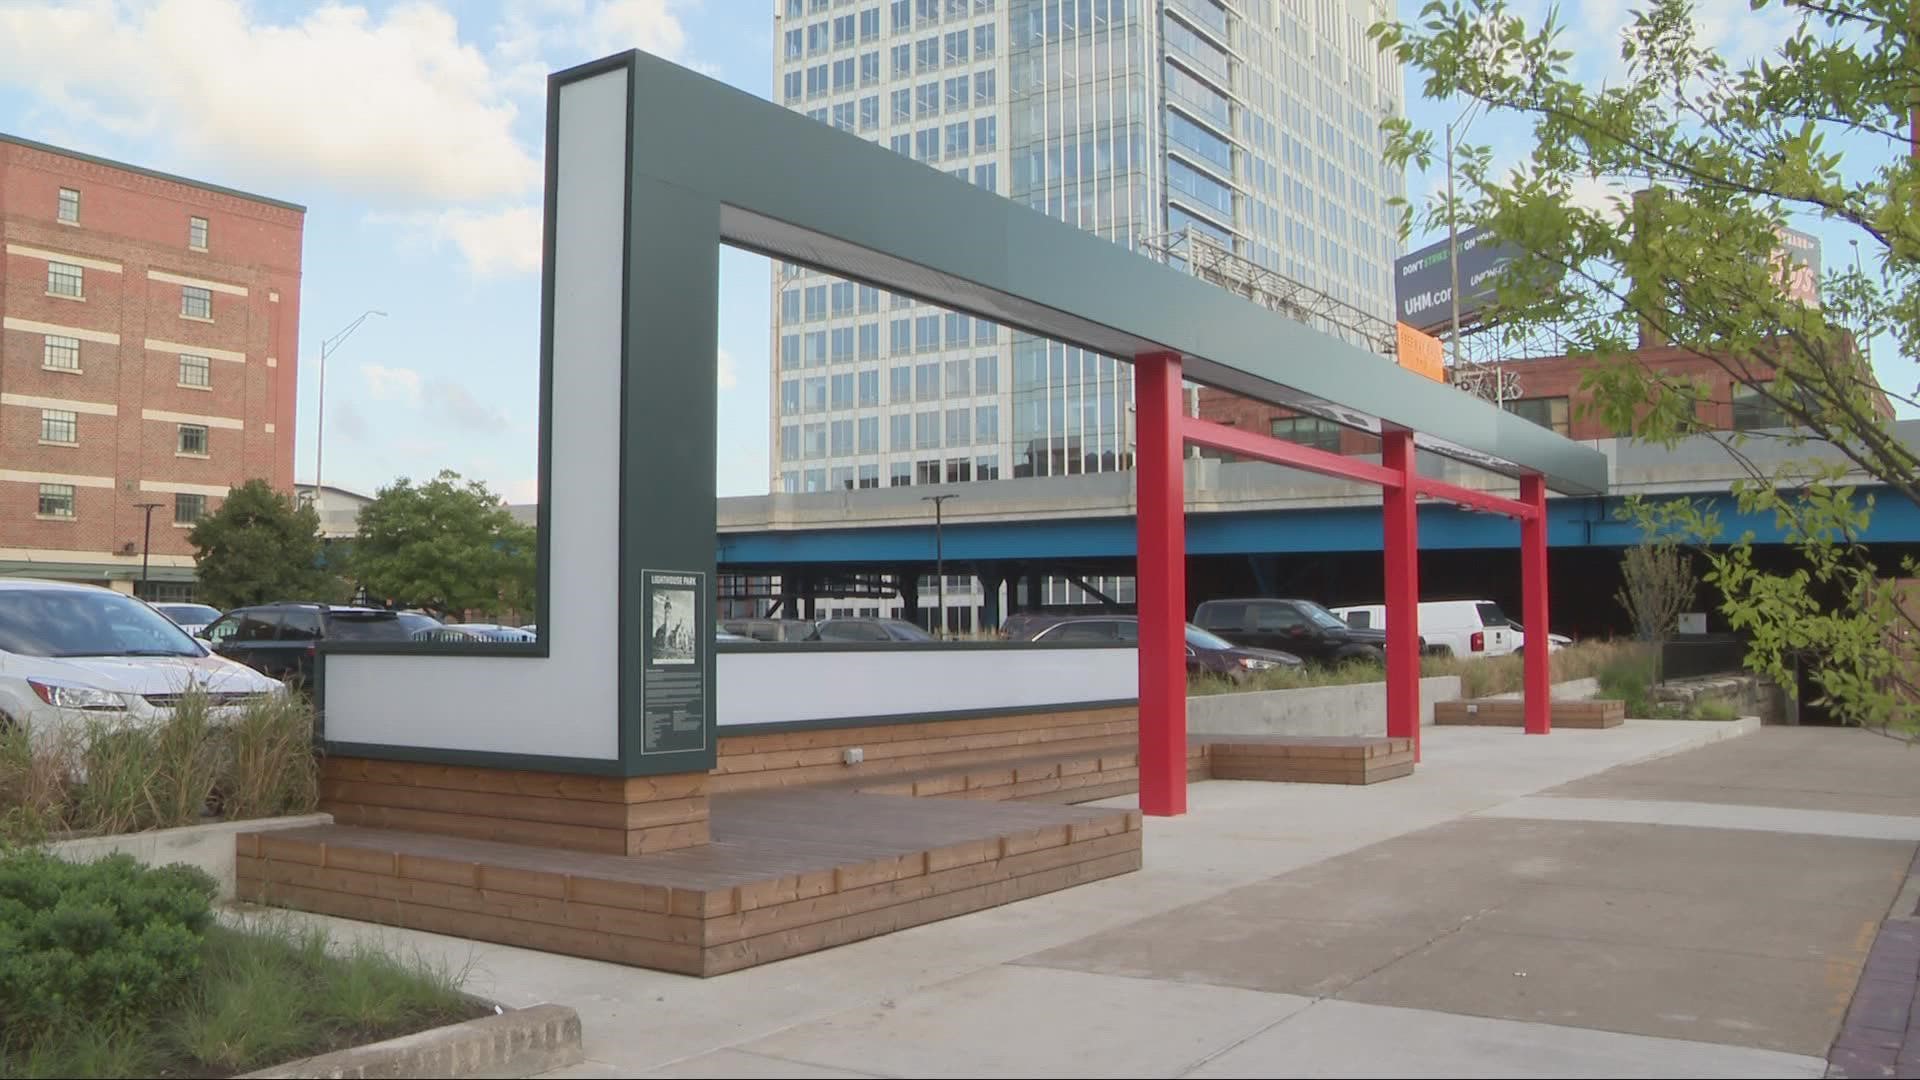 Downtown Cleveland is opening a brand new Pocket Park on West 9th Street.